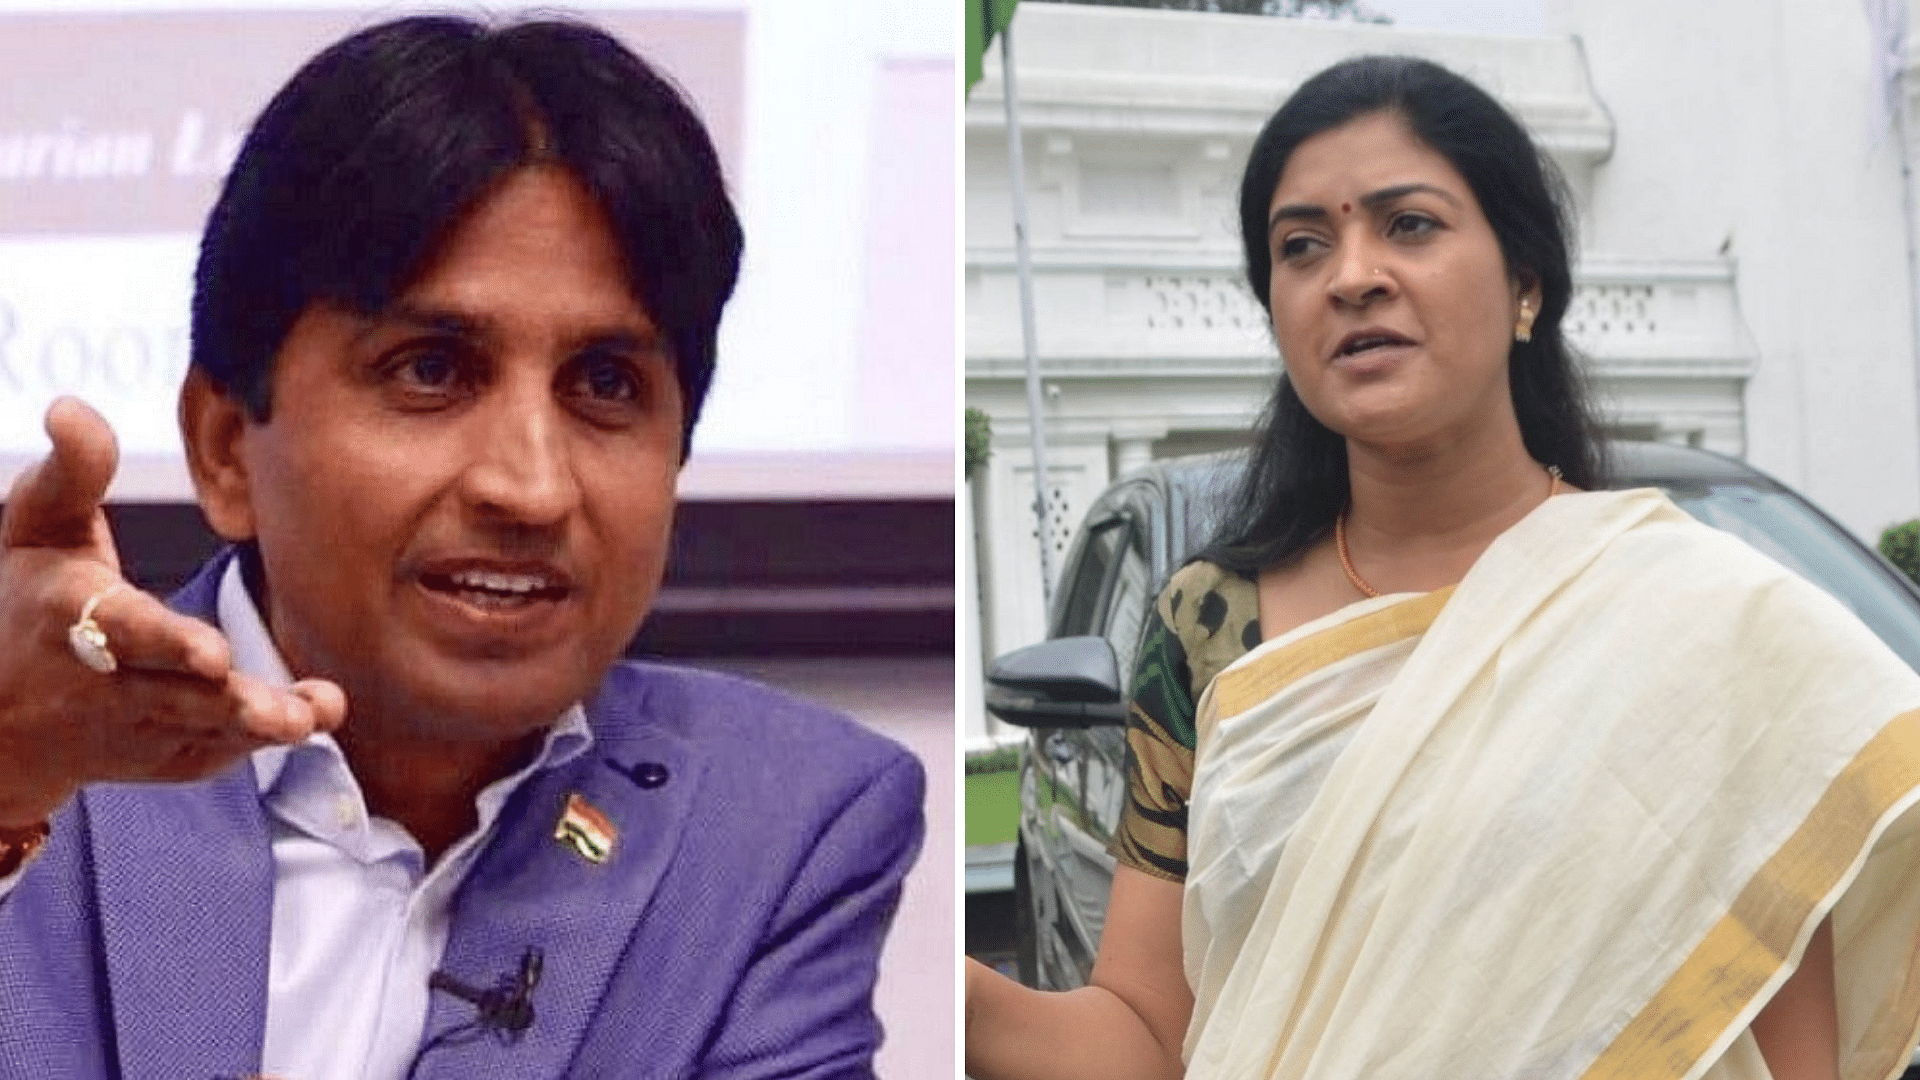 <div class="paragraphs"><p>Punjab Pradesh Congress Committee (PPCC) wrote to Punjab Police Director General of Police VK Bhawra on Thursday, 21 April, requesting him to cancel the First Information Report (FIR) registered against Alka Lamba and Kumar Vishwas.</p></div>